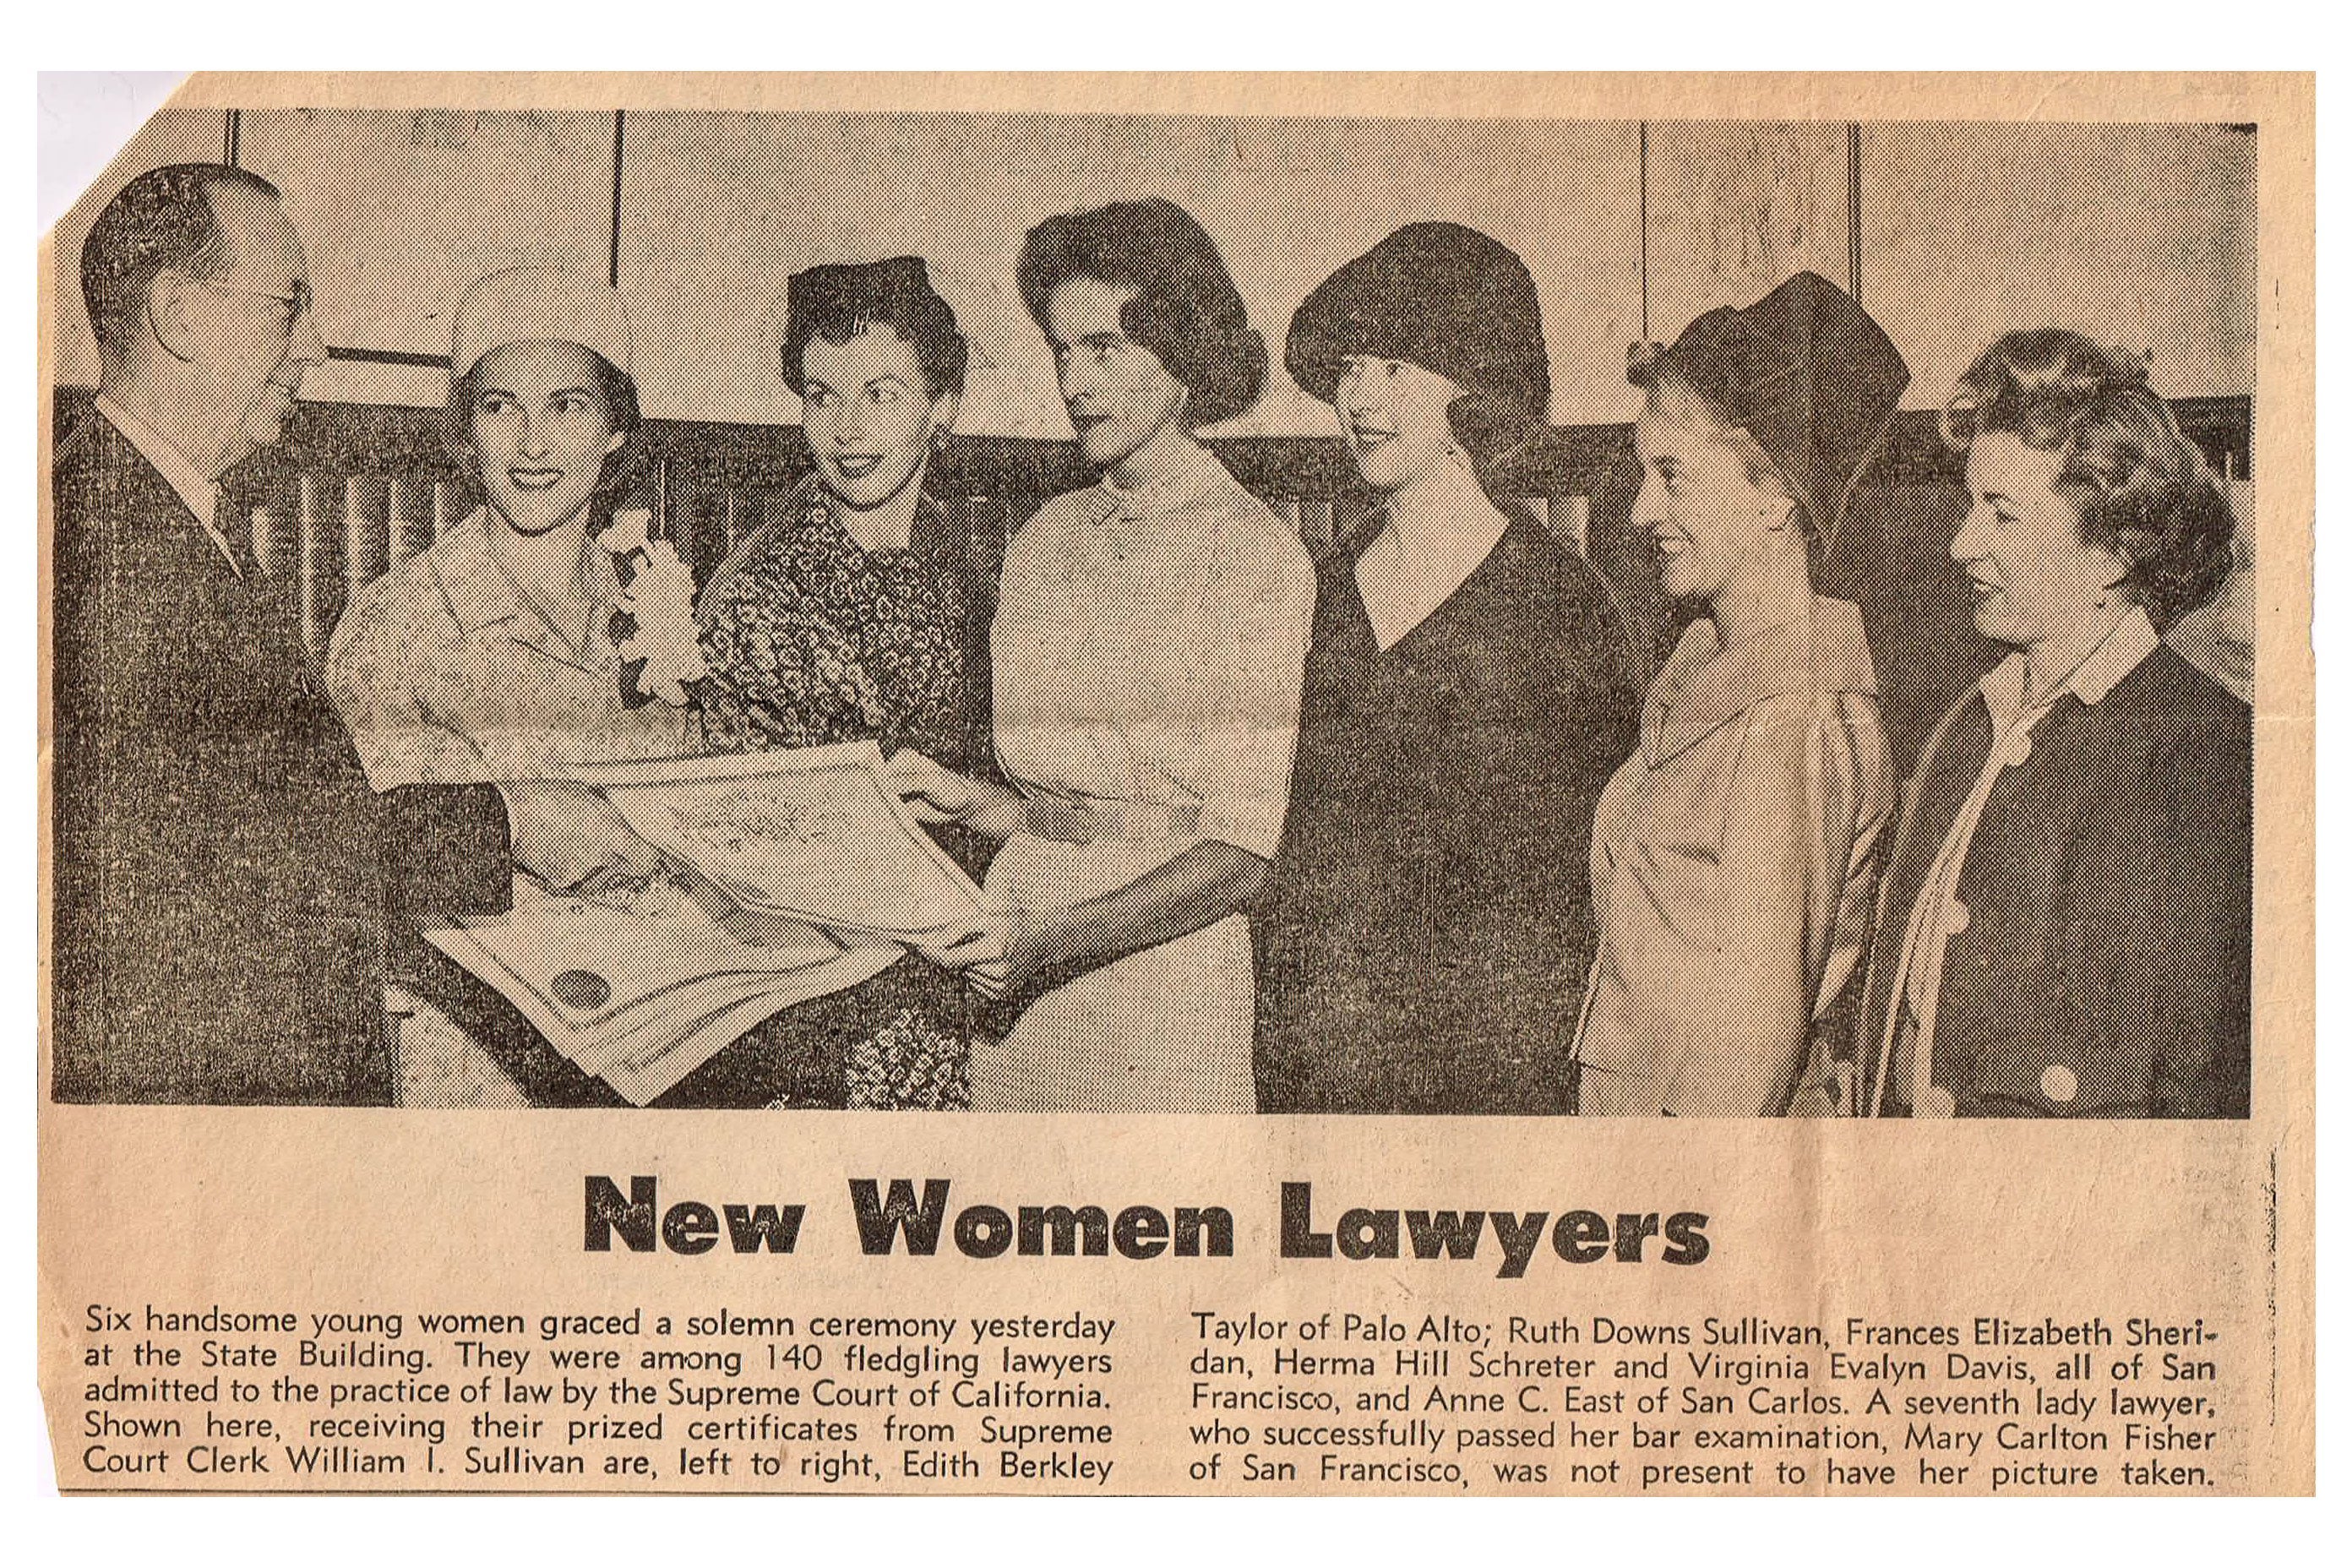 A newspaper clipping with the headline "New Women Lawyers."